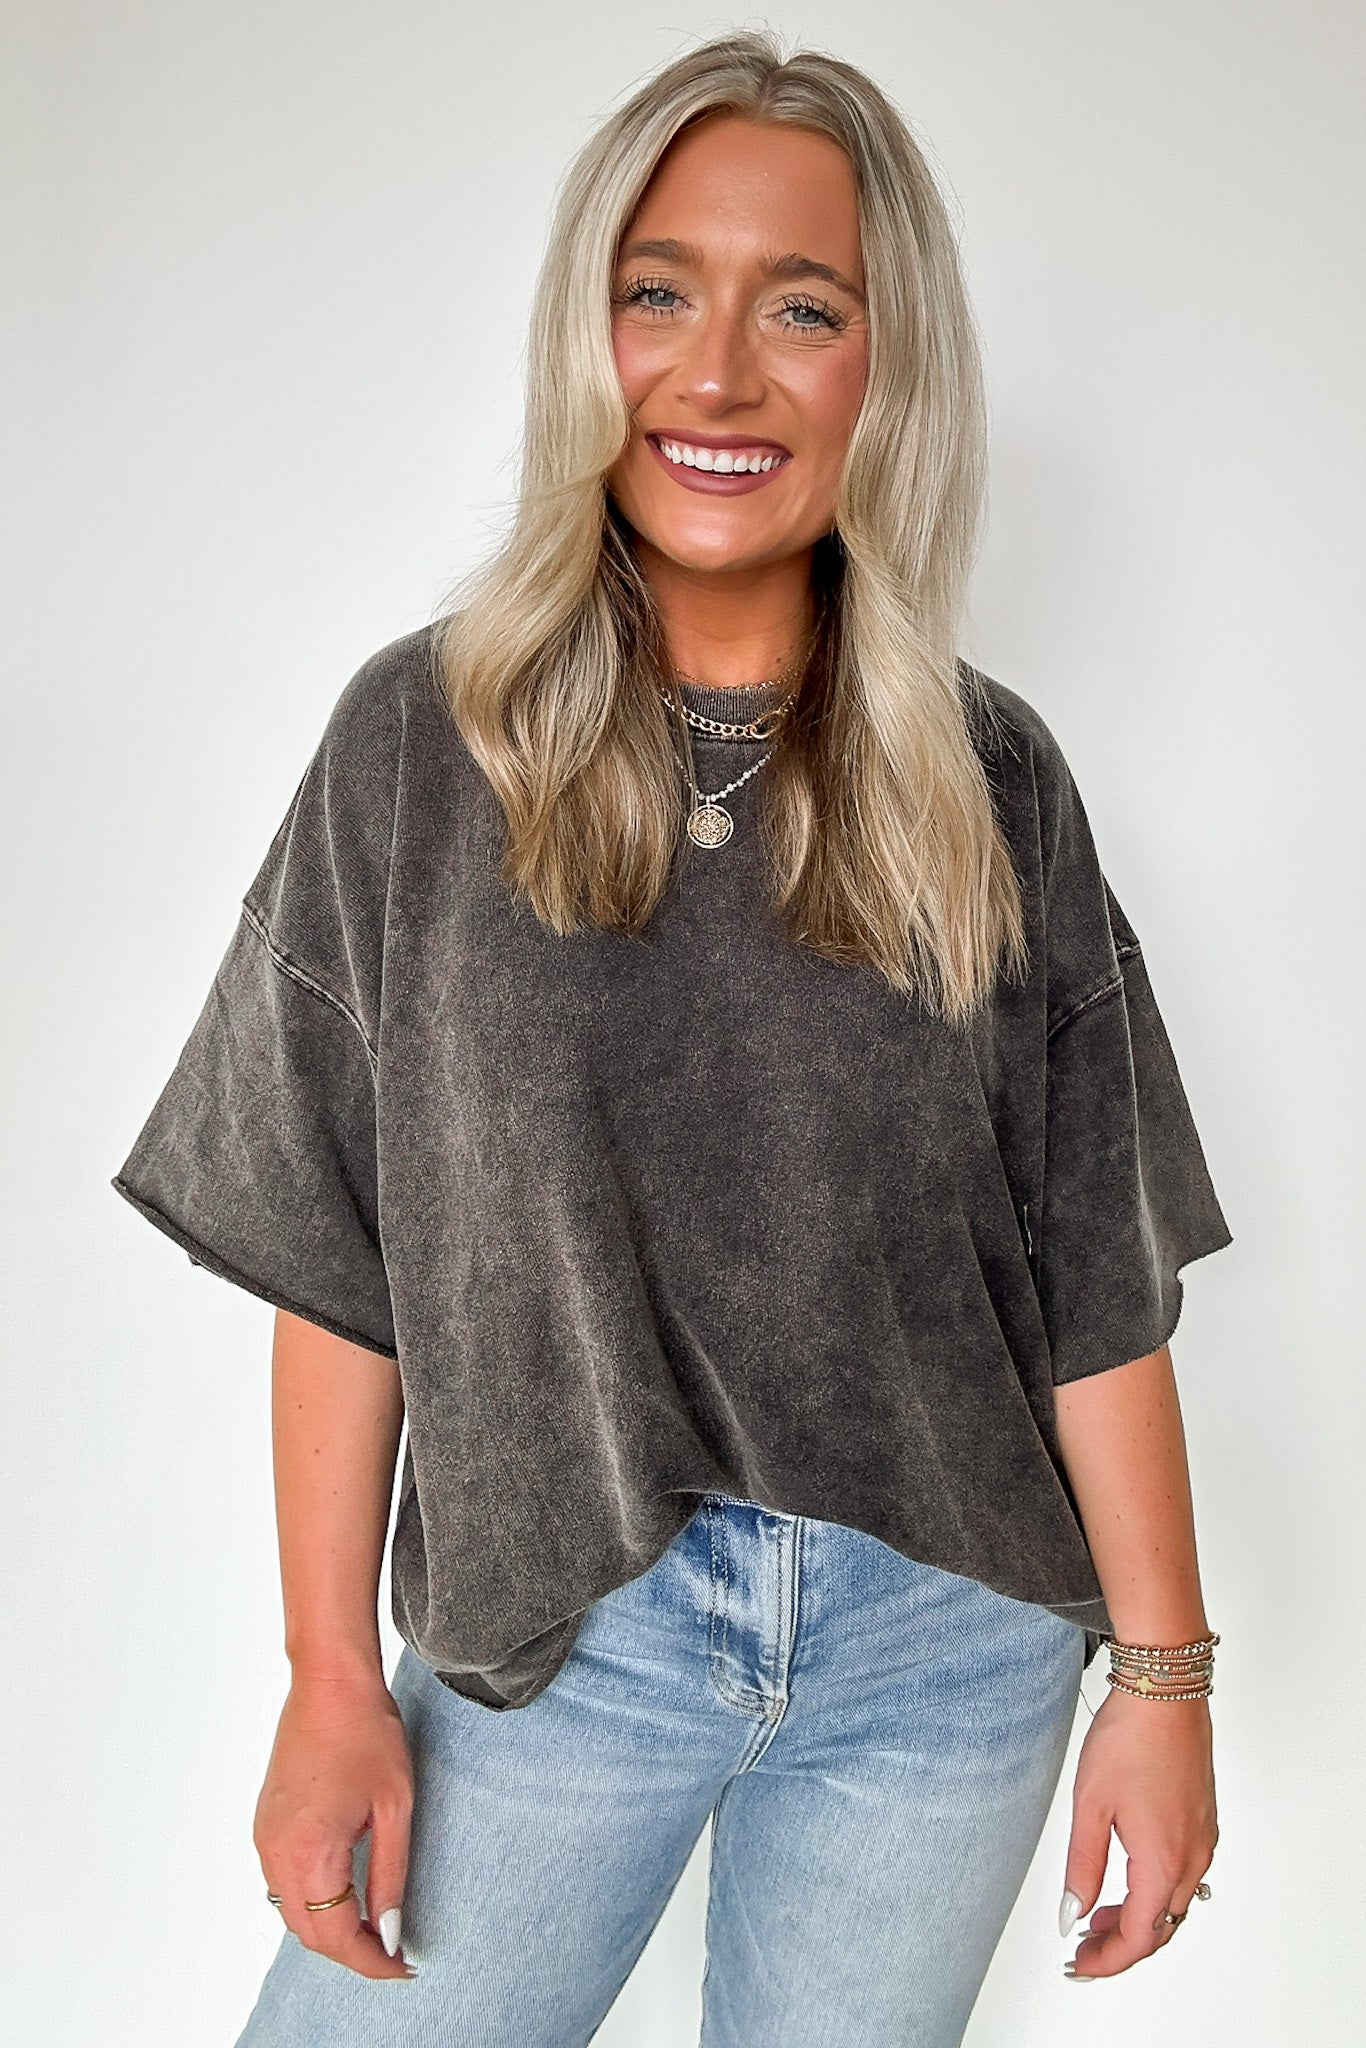  Drifting Dreams Acid Wash Relaxed Fit Top - BACK IN STOCK - Madison and Mallory